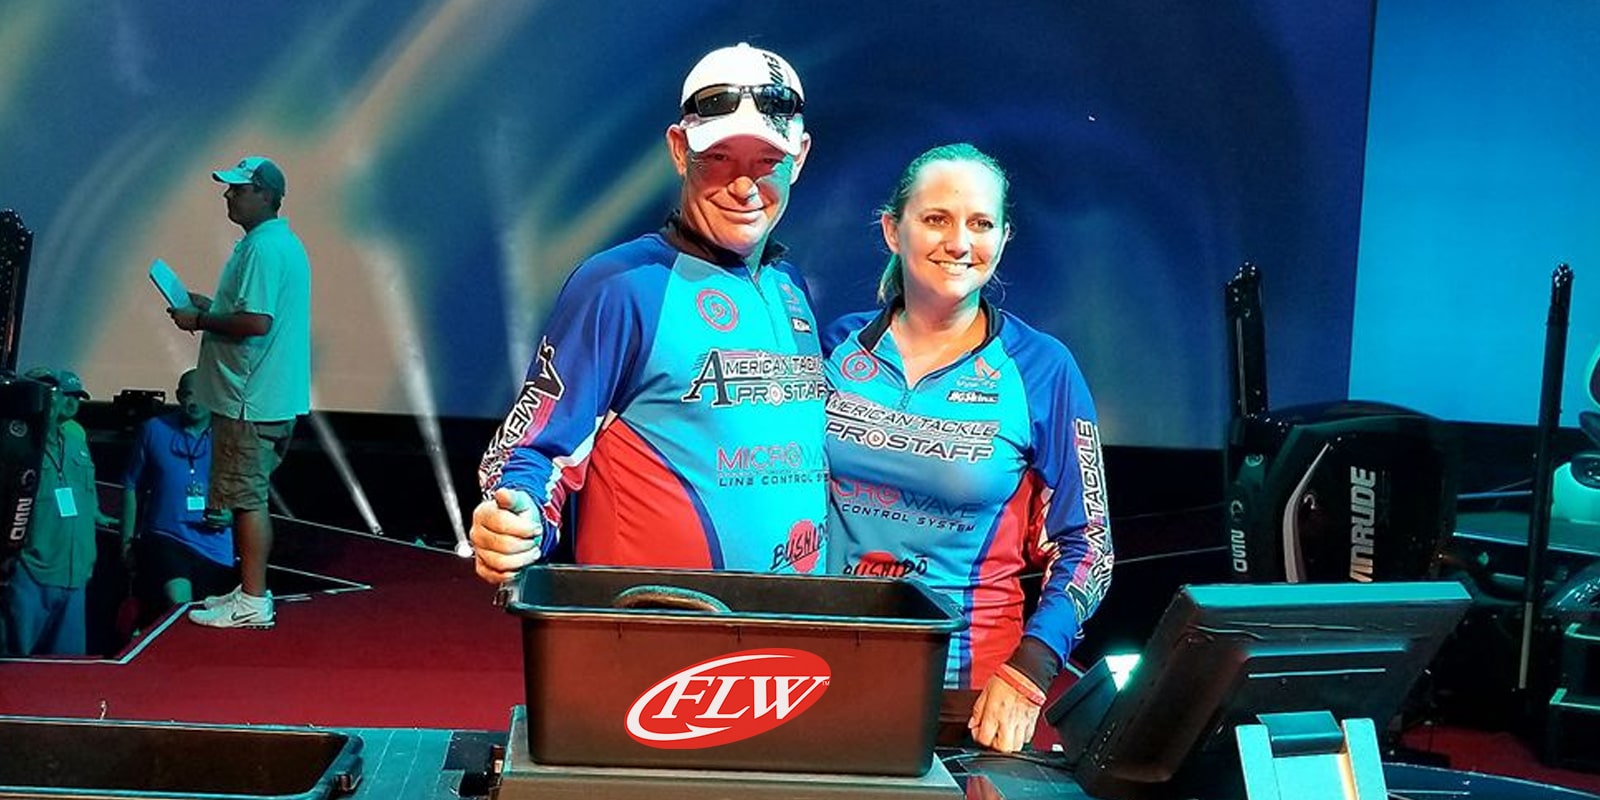 Kate Hough FLW Co-Angler Of The Year 2019